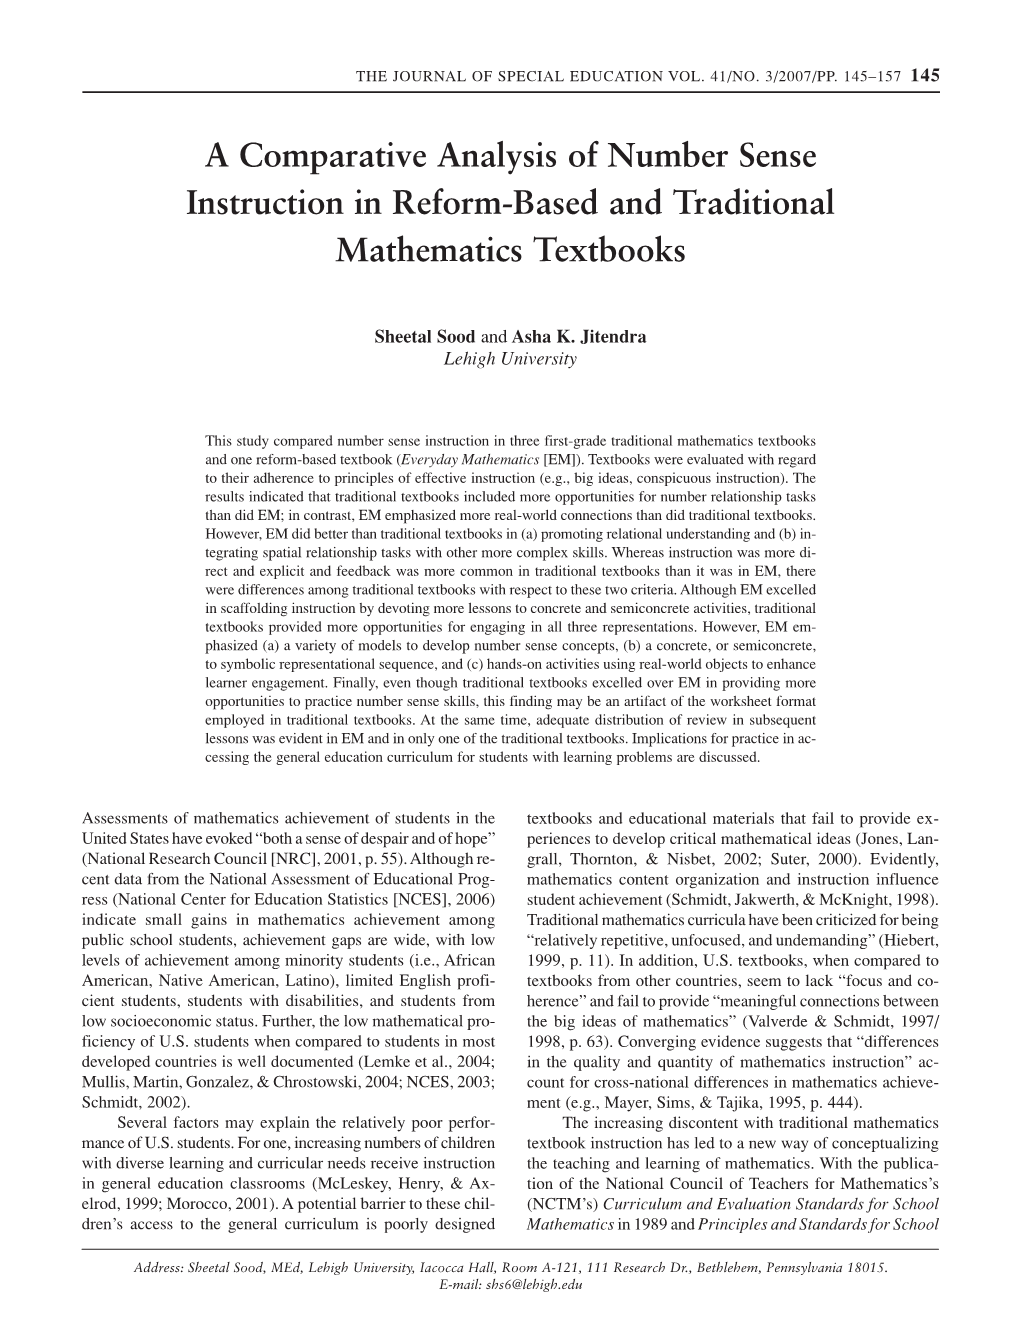 A Comparative Analysis of Number Sense Instruction in Reform-Based and Traditional Mathematics Textbooks